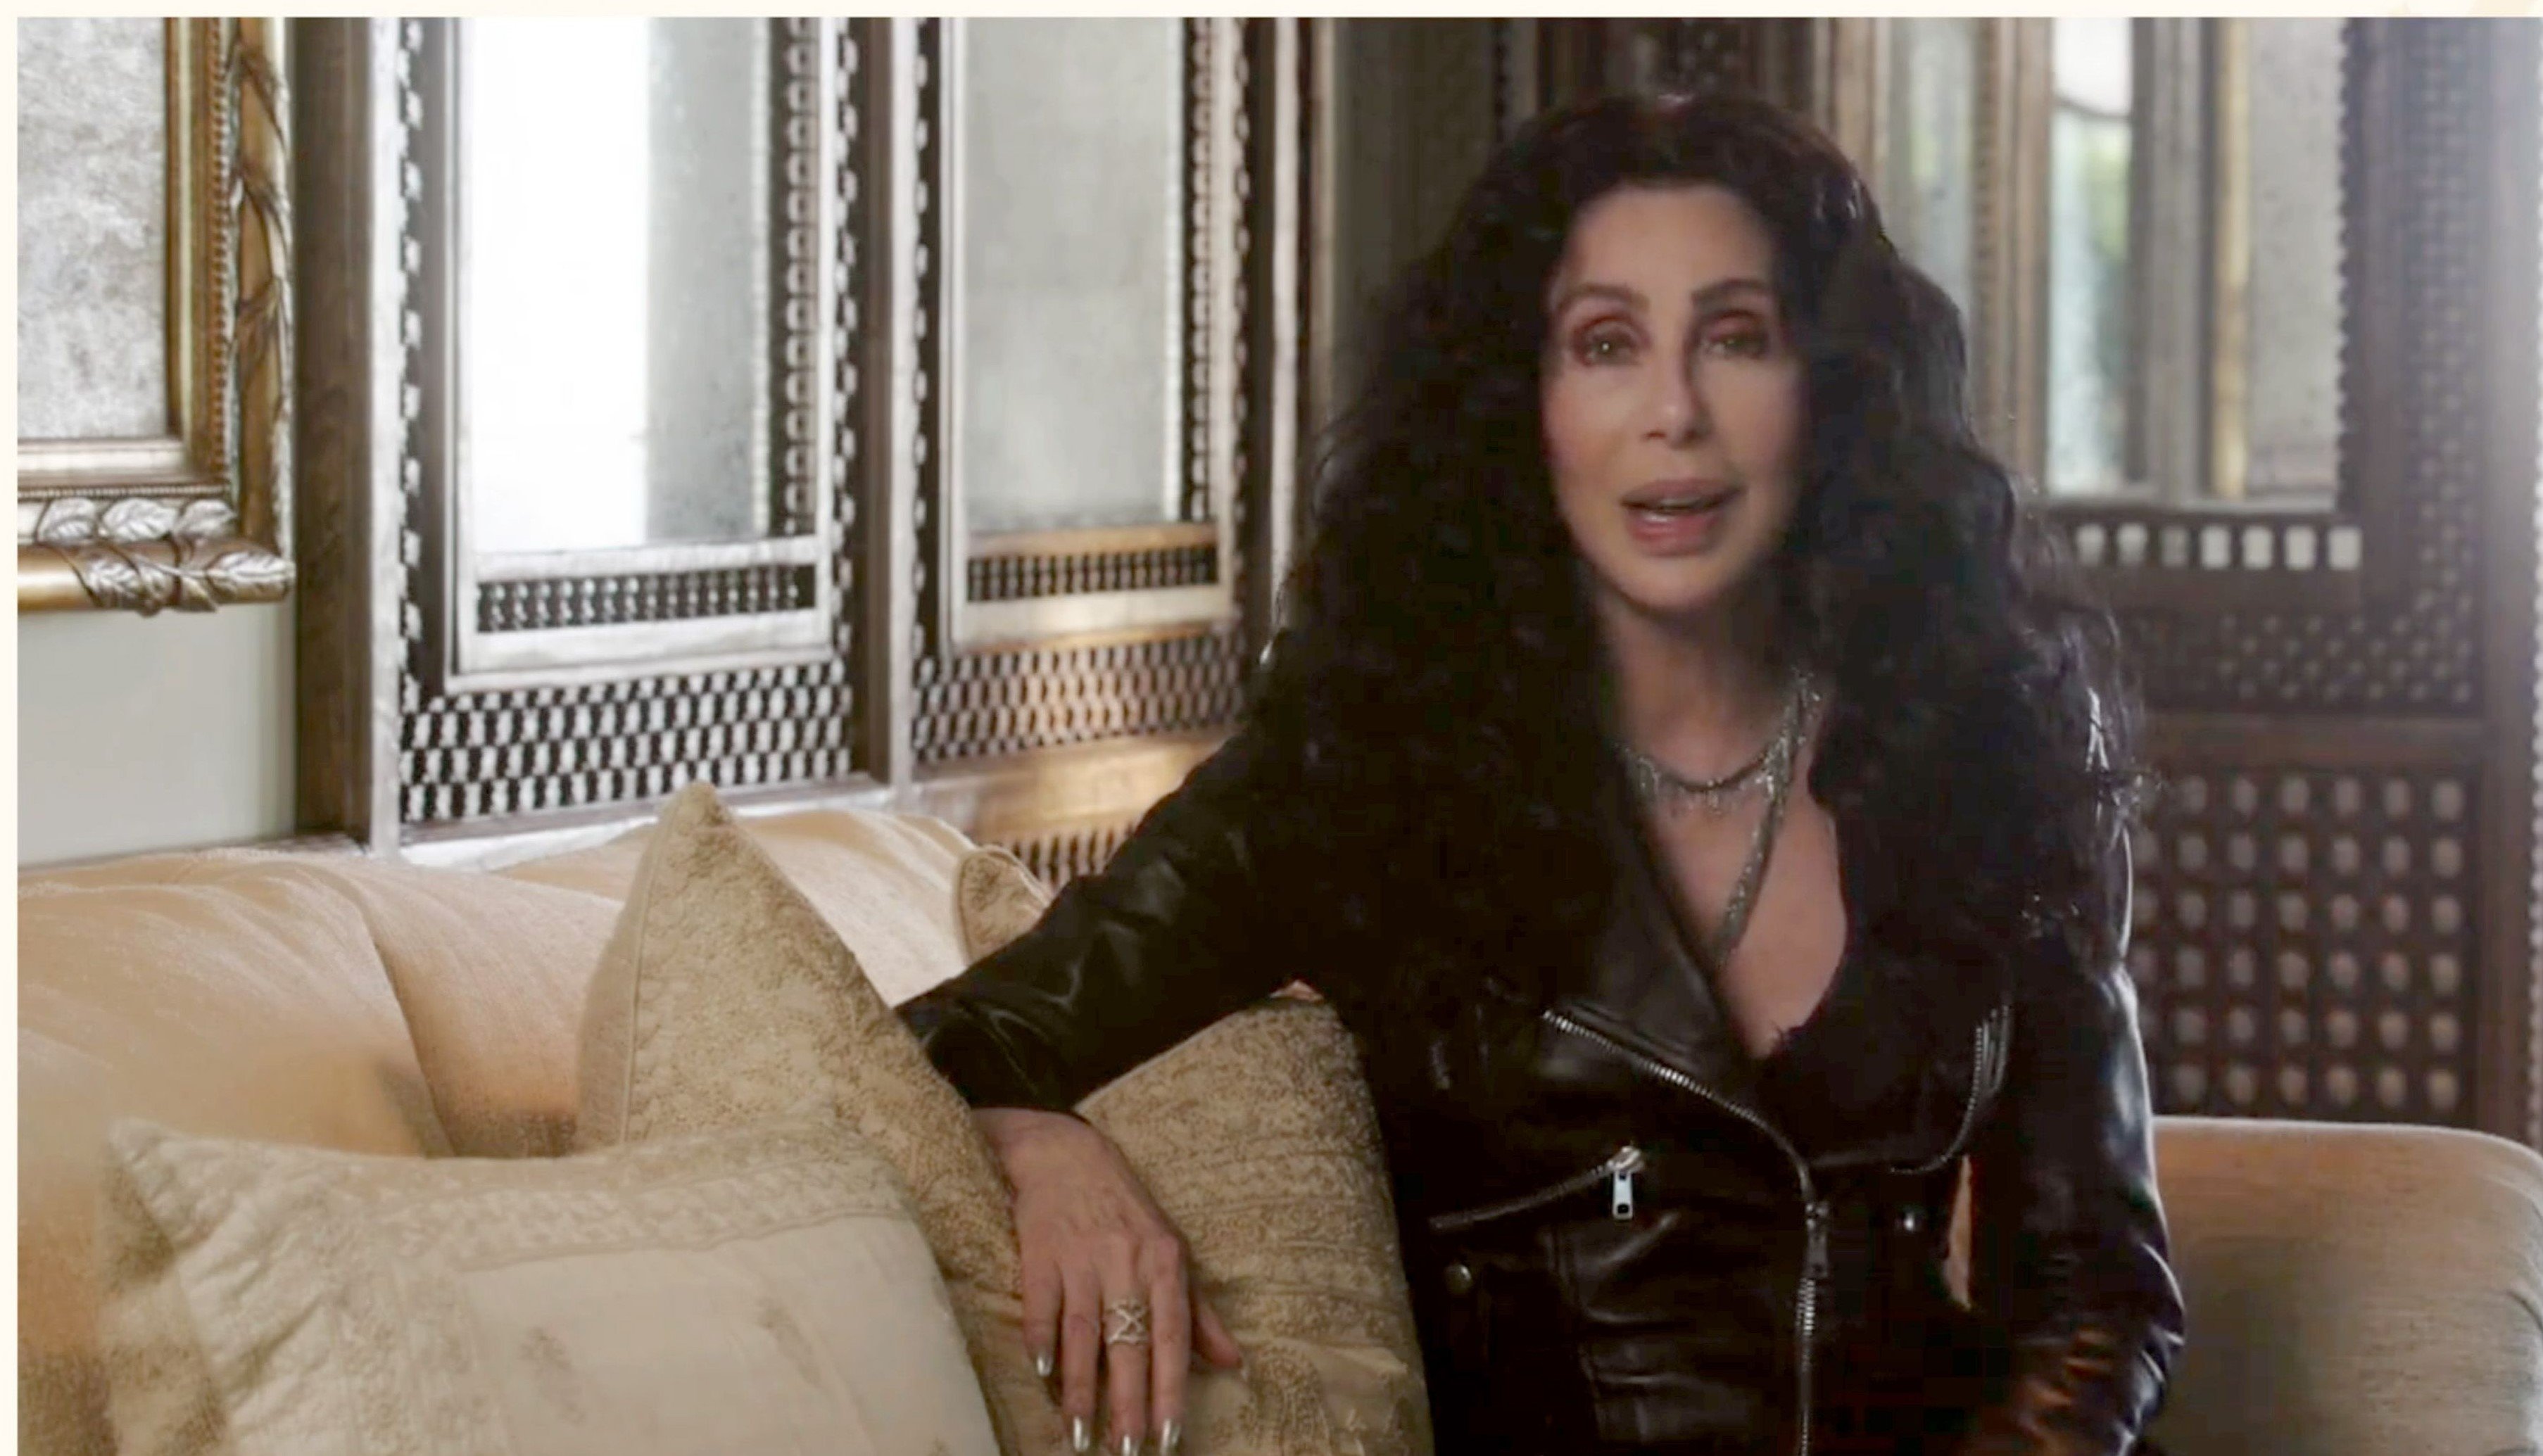 Cher speaking during the 'We The People' virtual concert